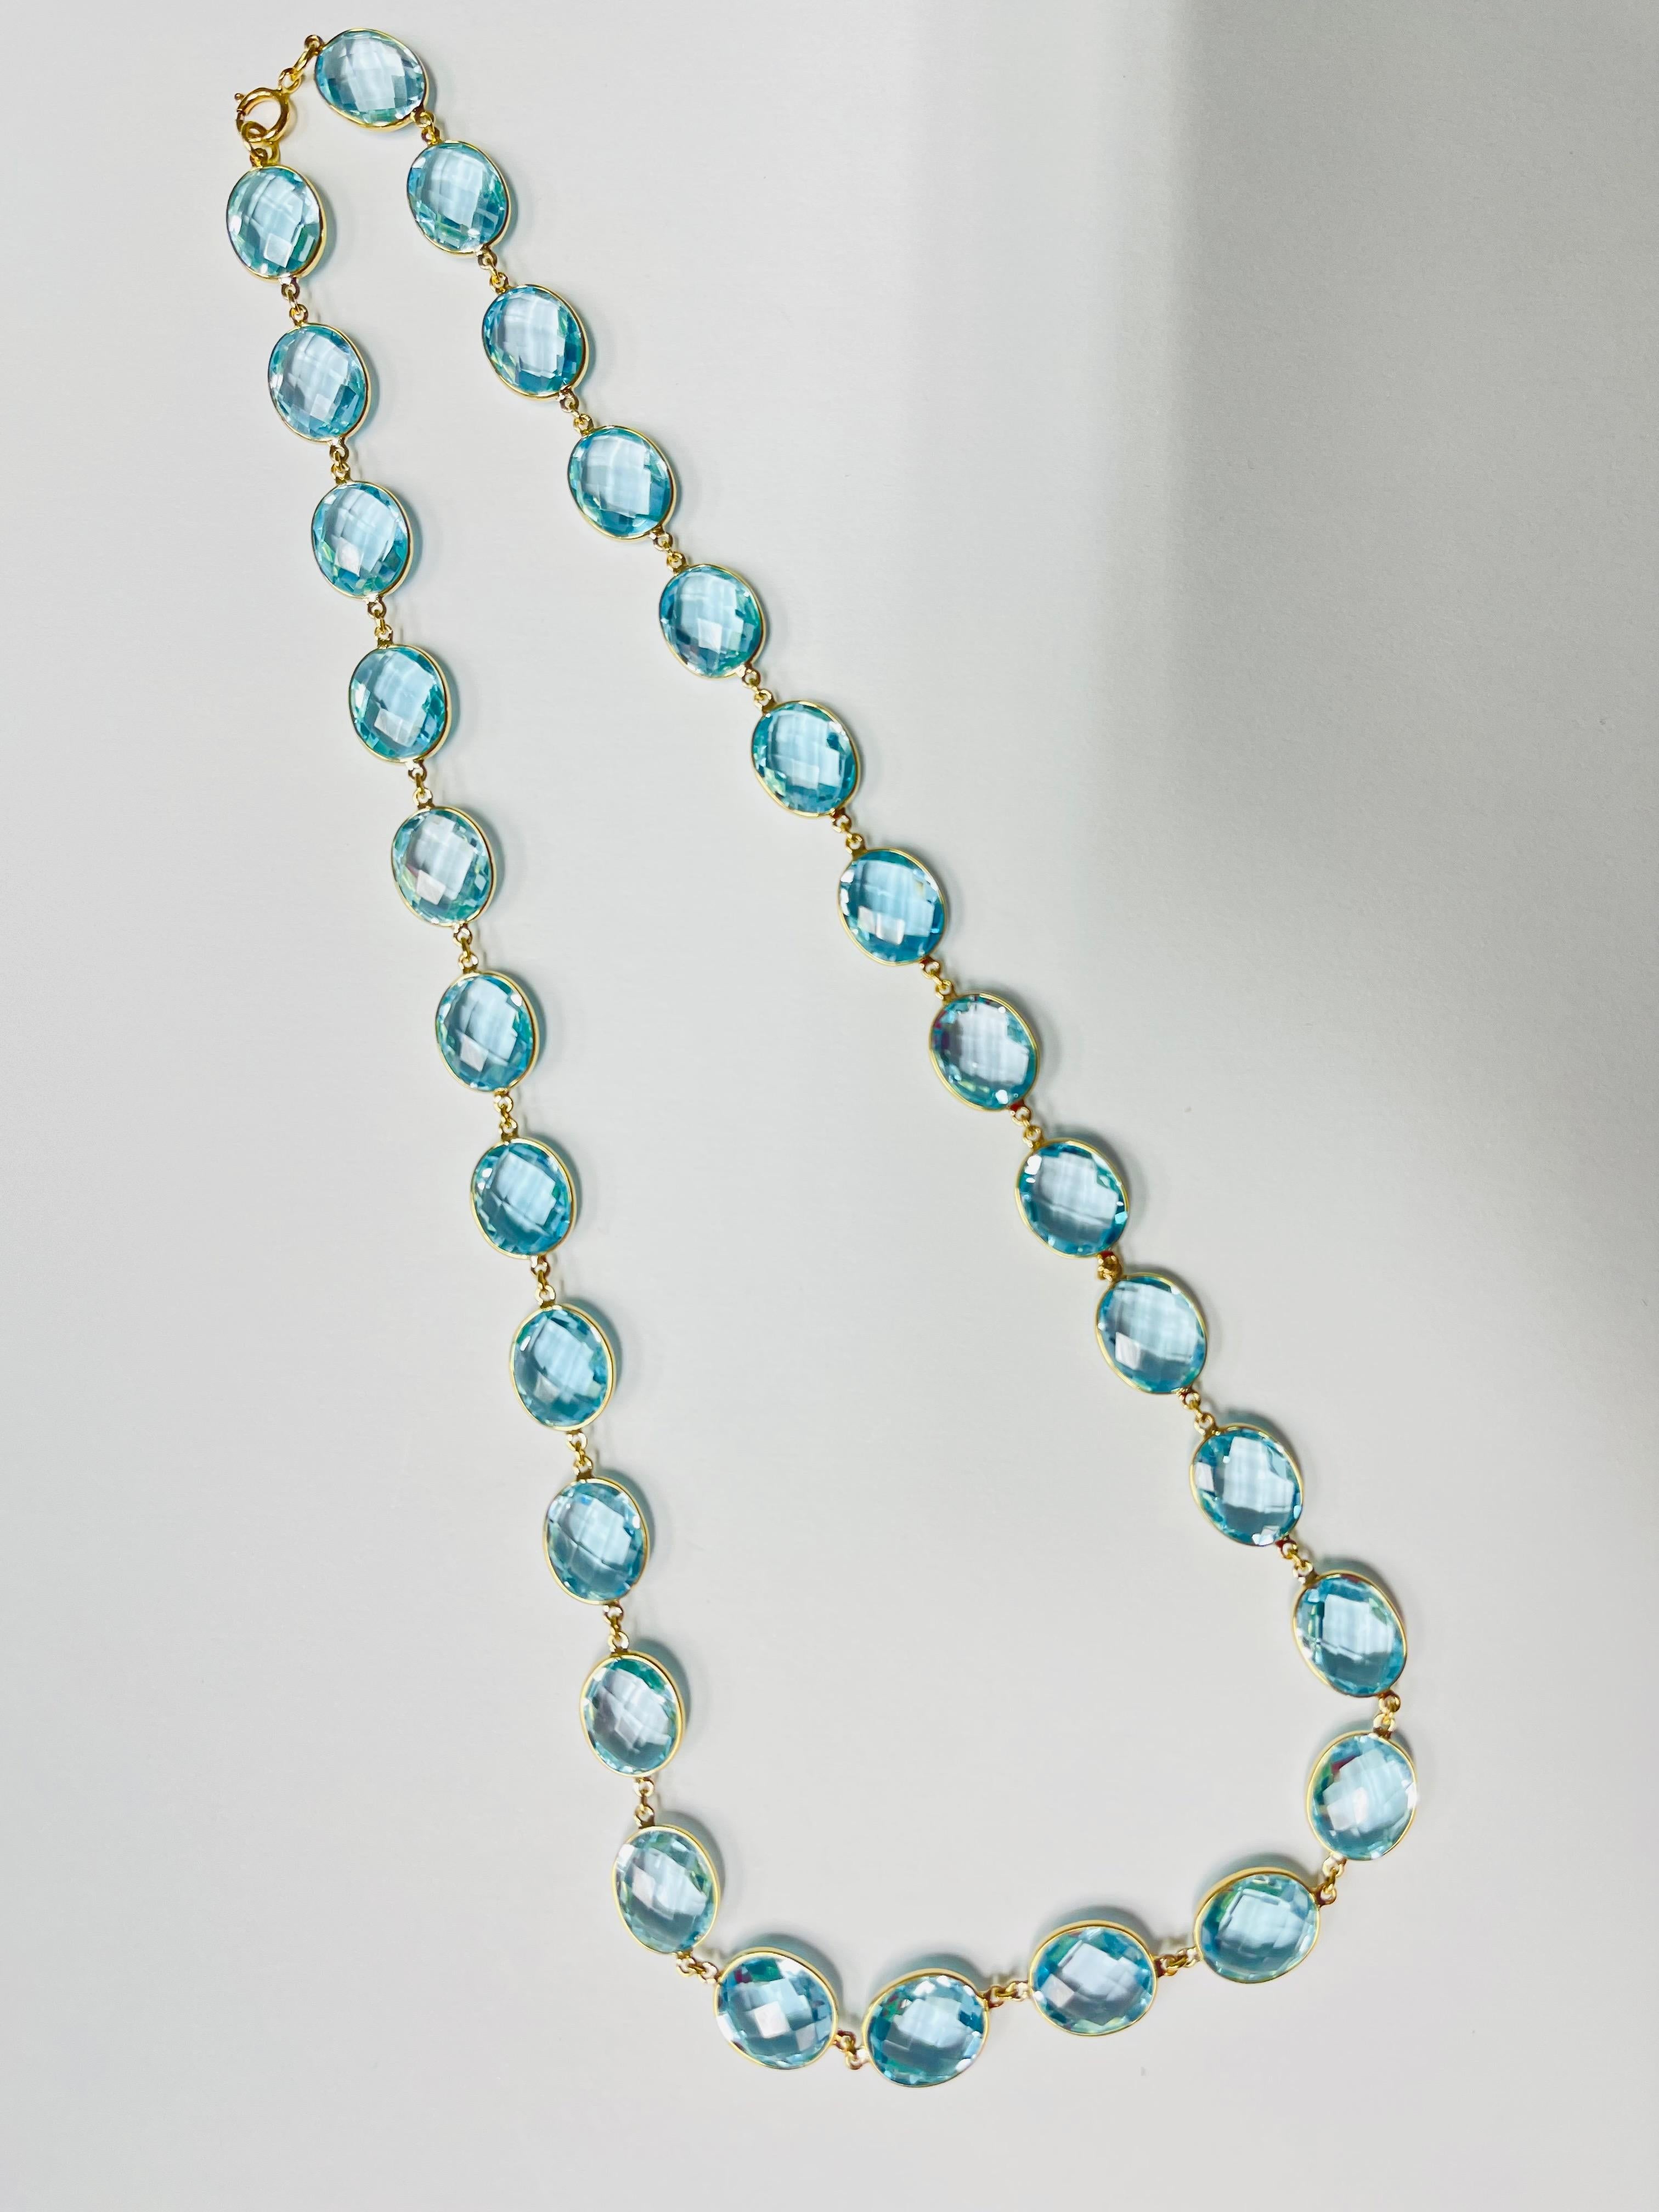 Women's 110 Carats Blue Topaz Necklace in 18K Yellow Gold